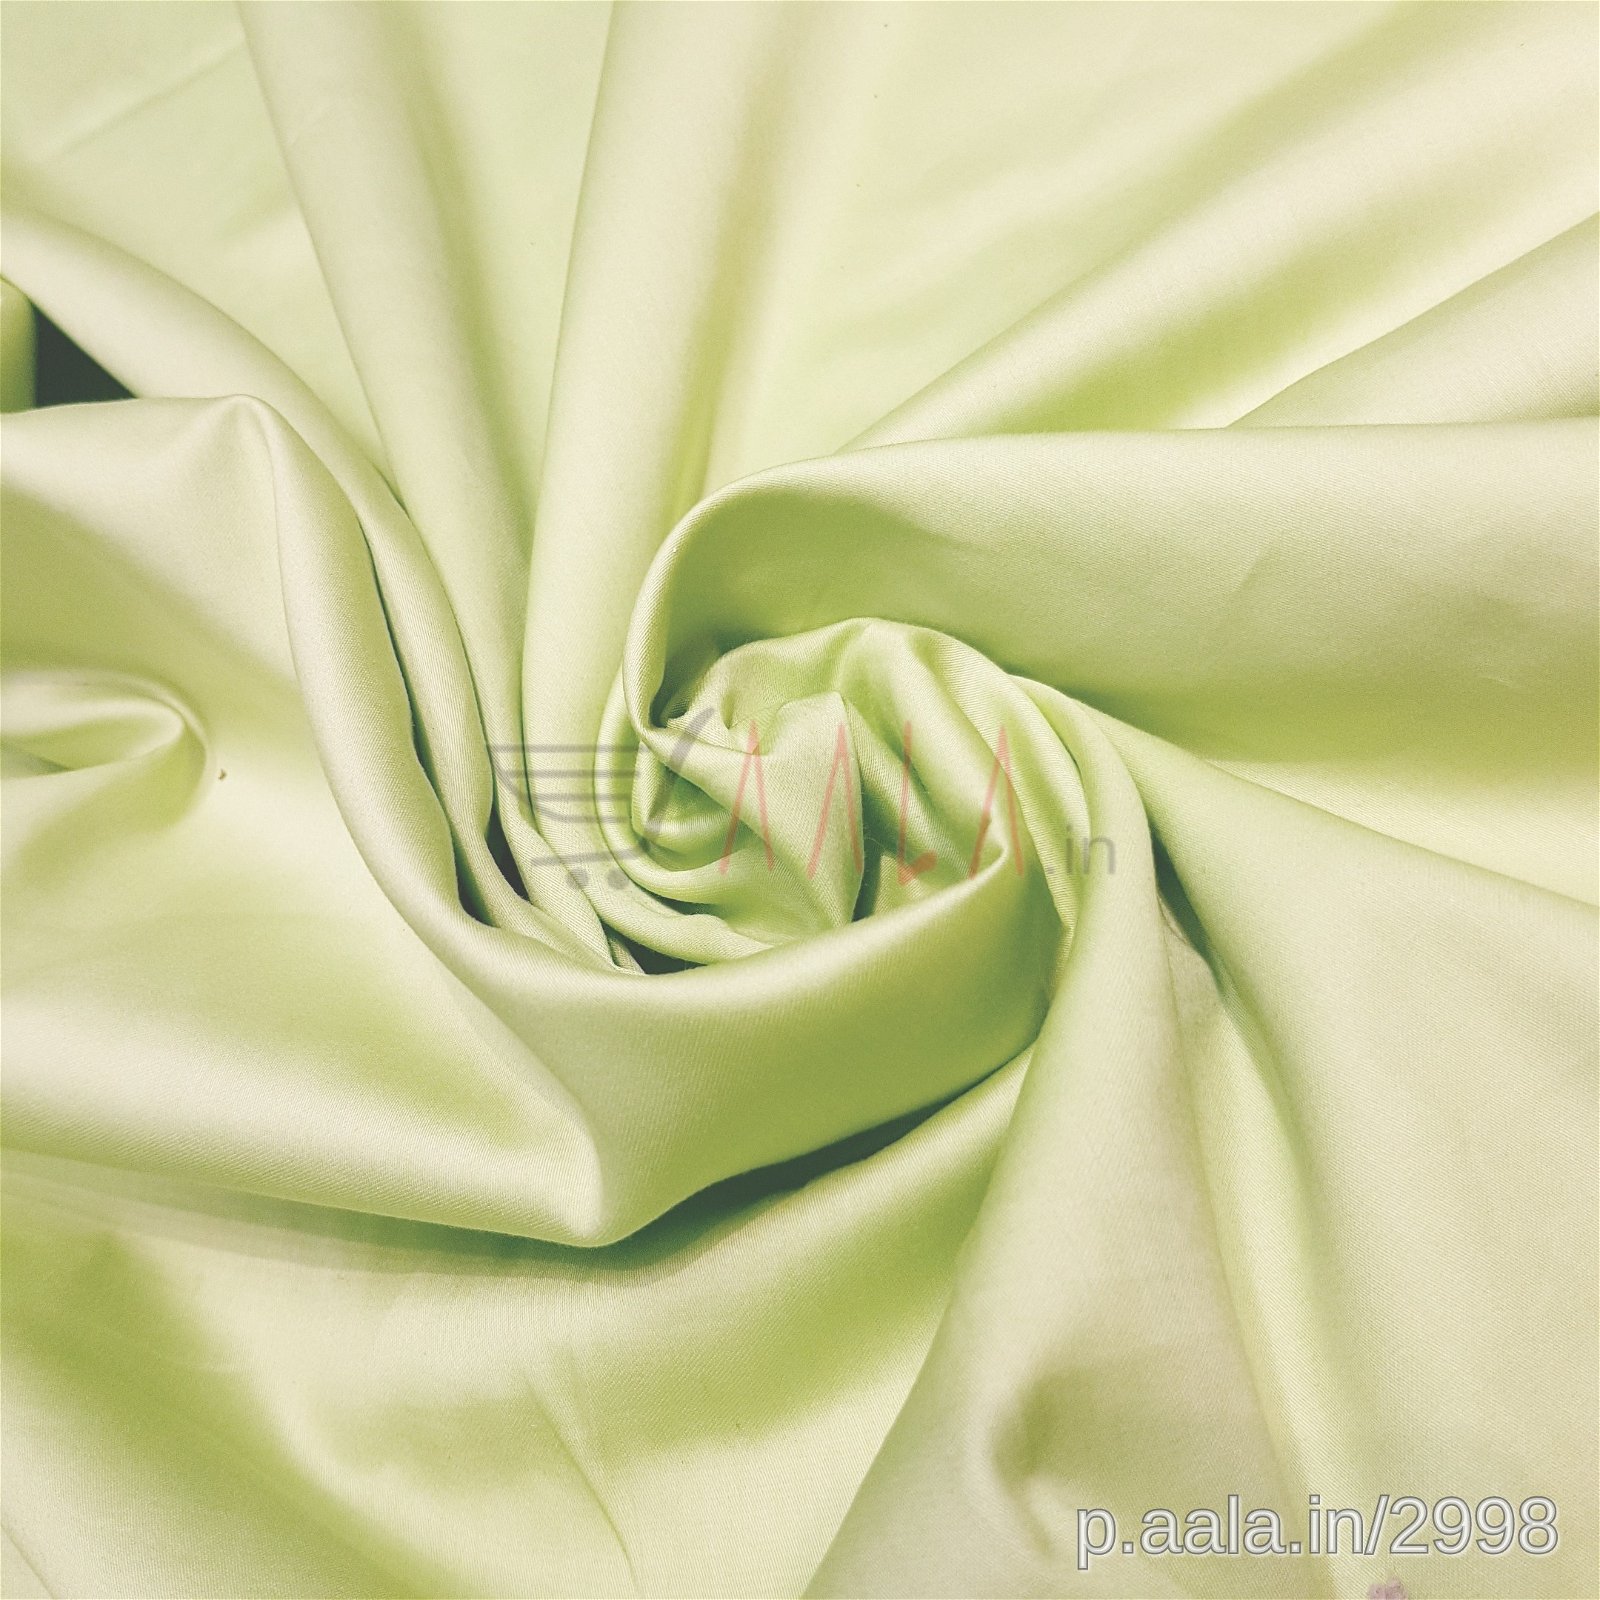 Satin Cotton 44 Inches Dyed Per Metre #2998